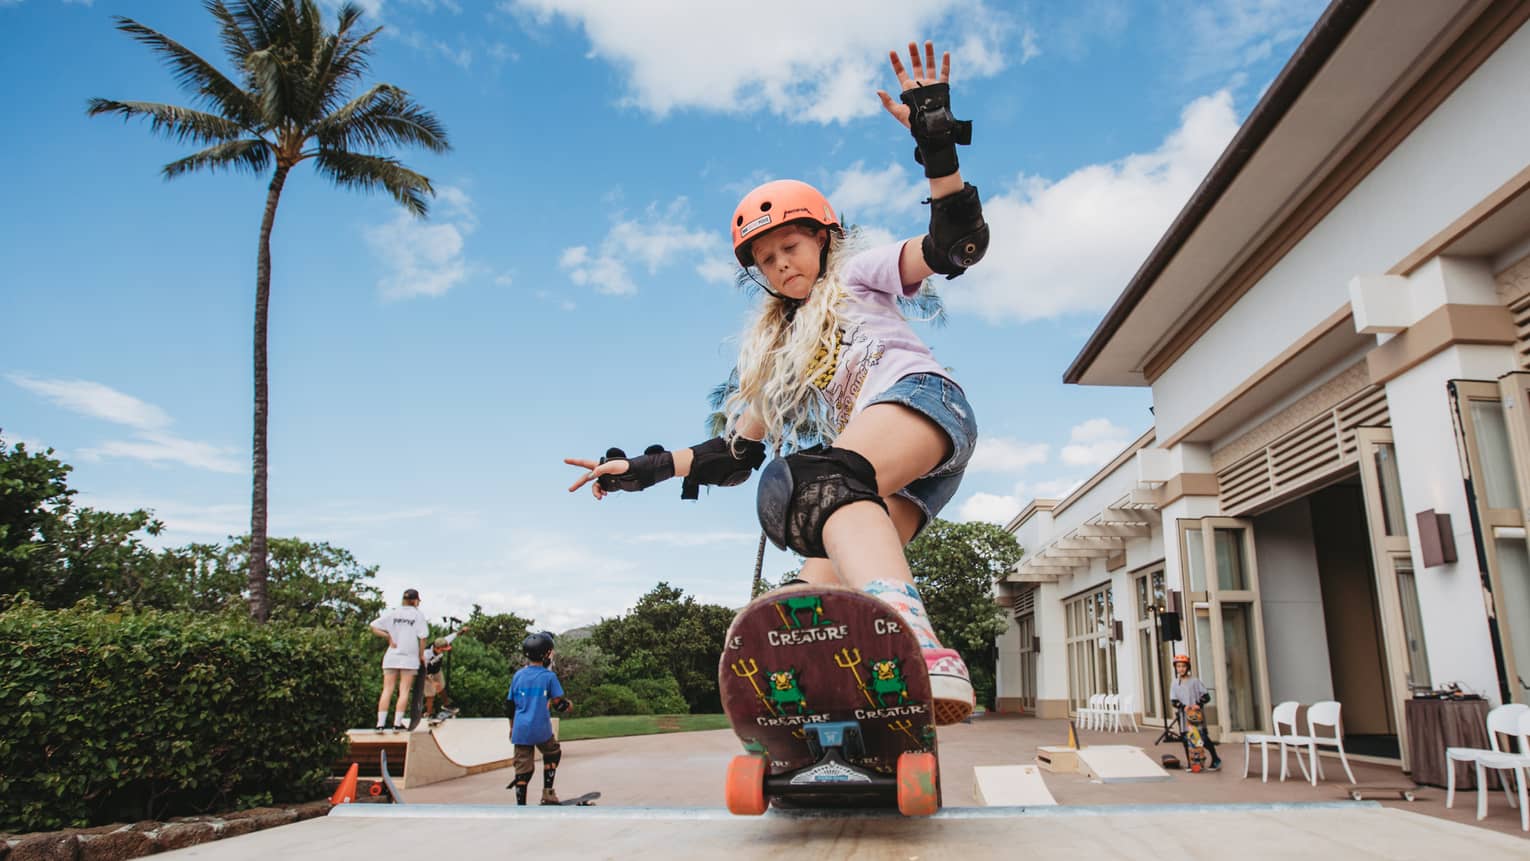 A young girl rides a skateboard at a skate park outside with palm trees